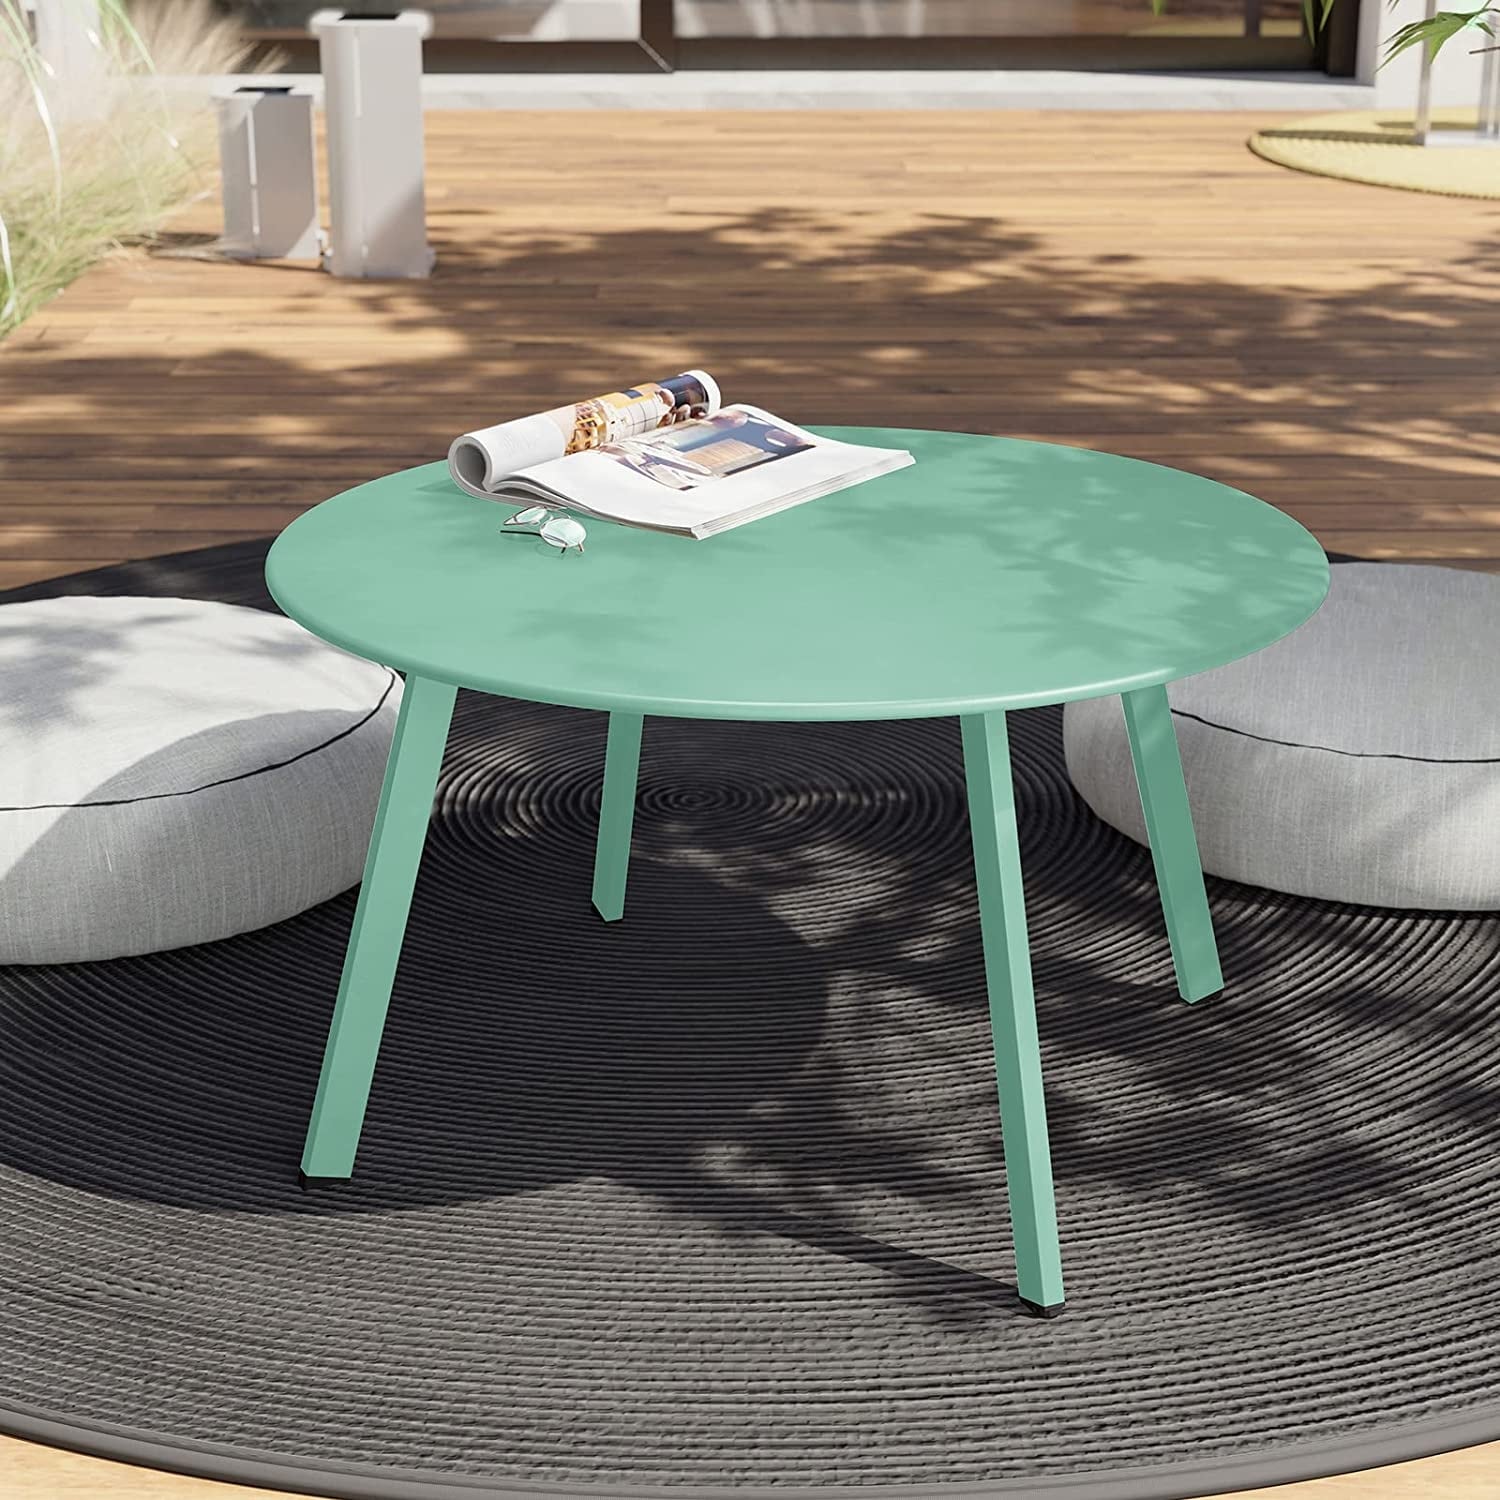 Grand live Steel Small Round Bistro Side Table,Outdoor/Indoor Ottoman,Tray Side Table Patio Coffee Table Snack Table Anti-Rusty Green 